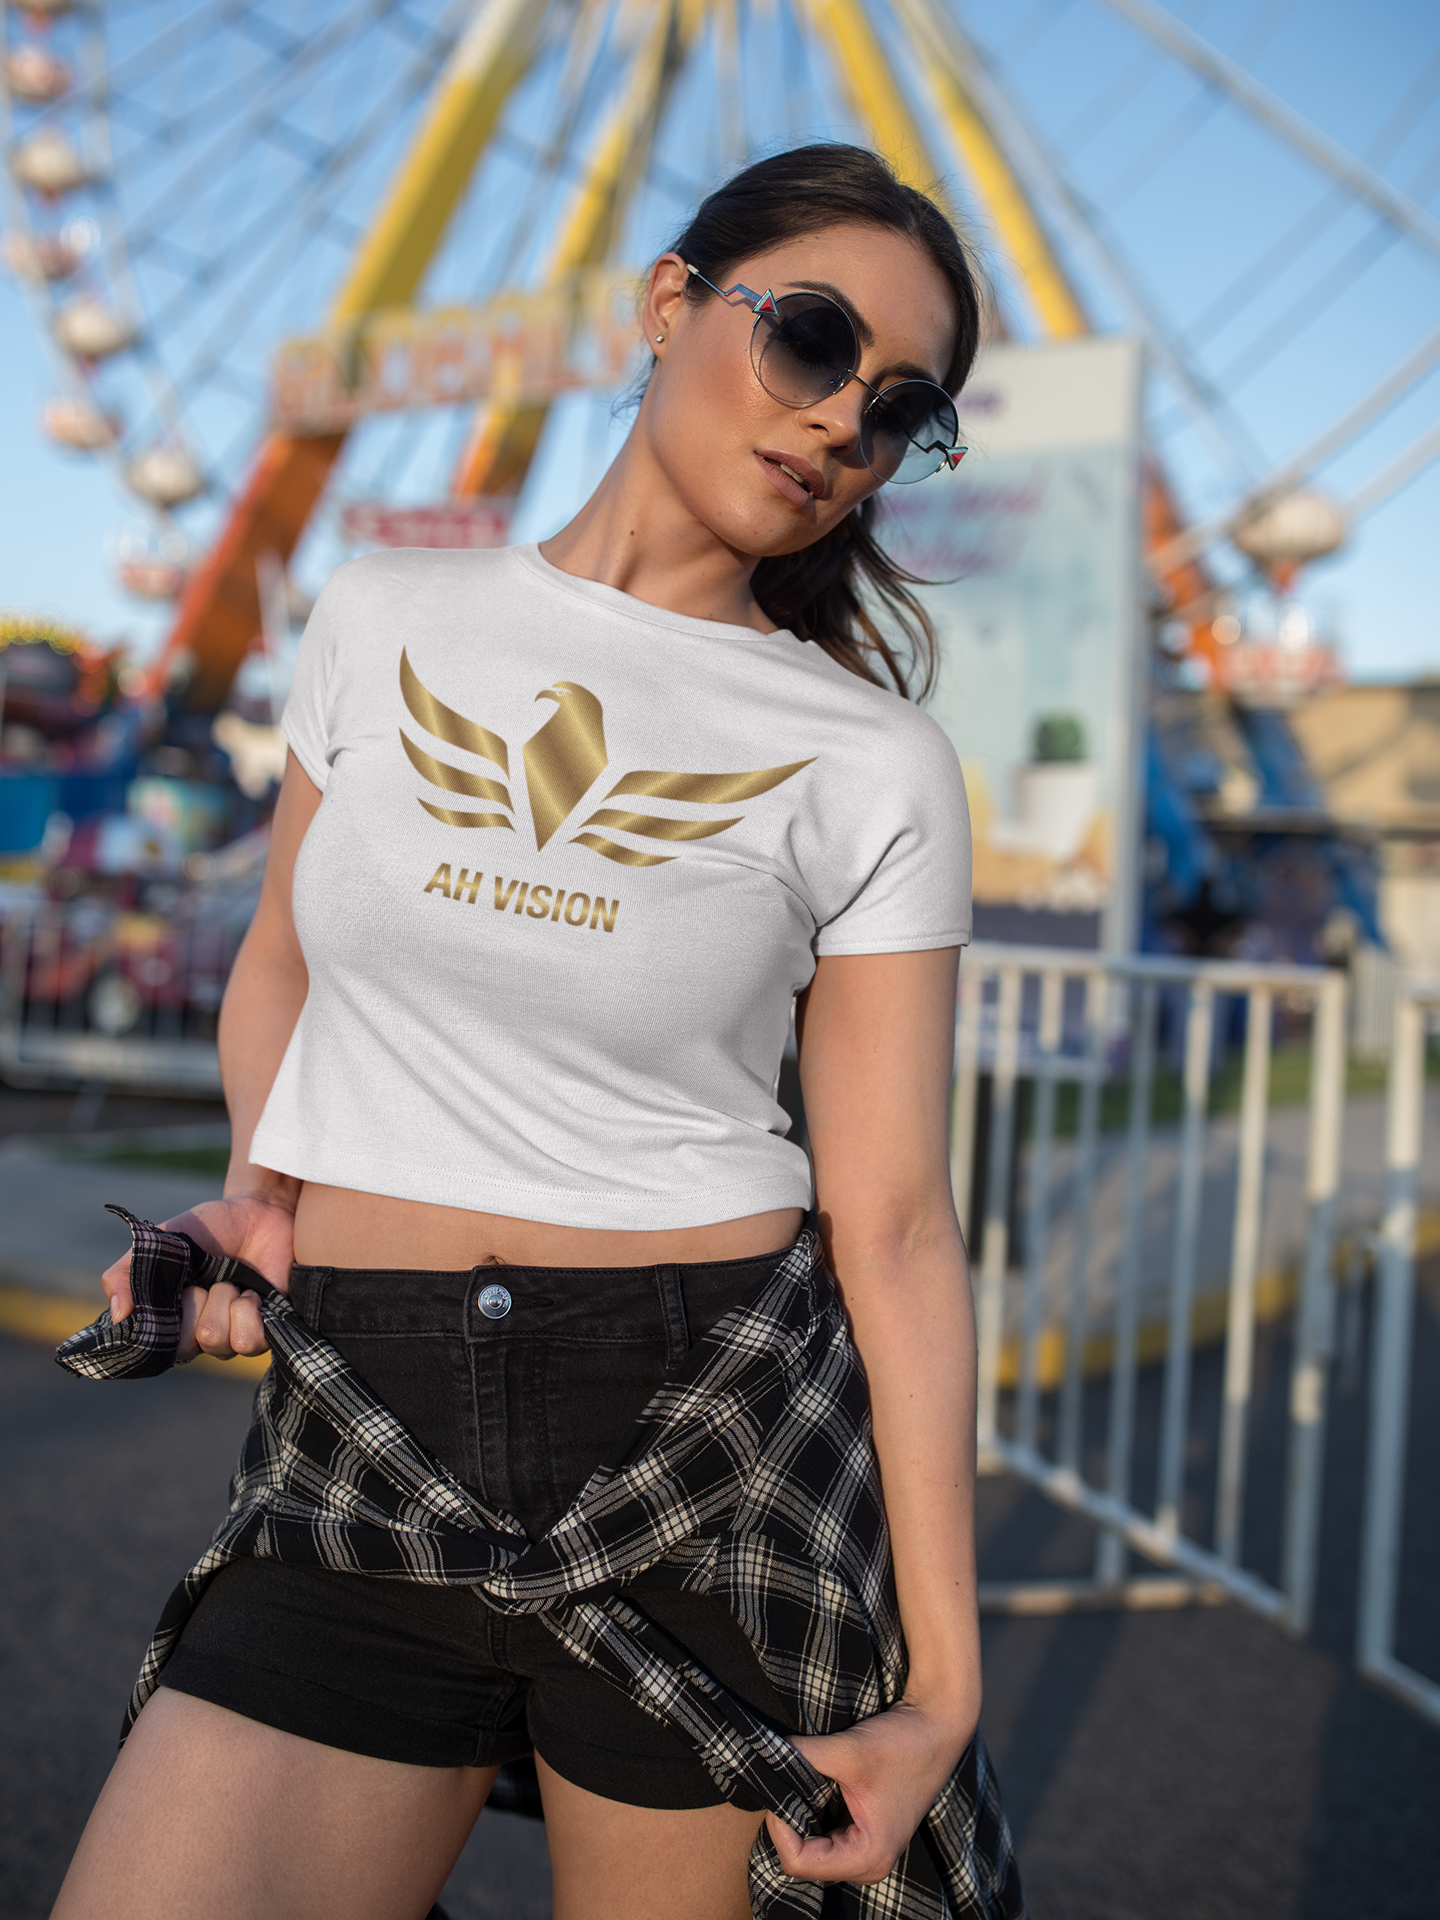 Women's White Crop Top T-shirt This goddess is wearing our comfortable White crop top Short Sleeve T-shirt that's appealing from every angle and will take your fashion game to the next level.